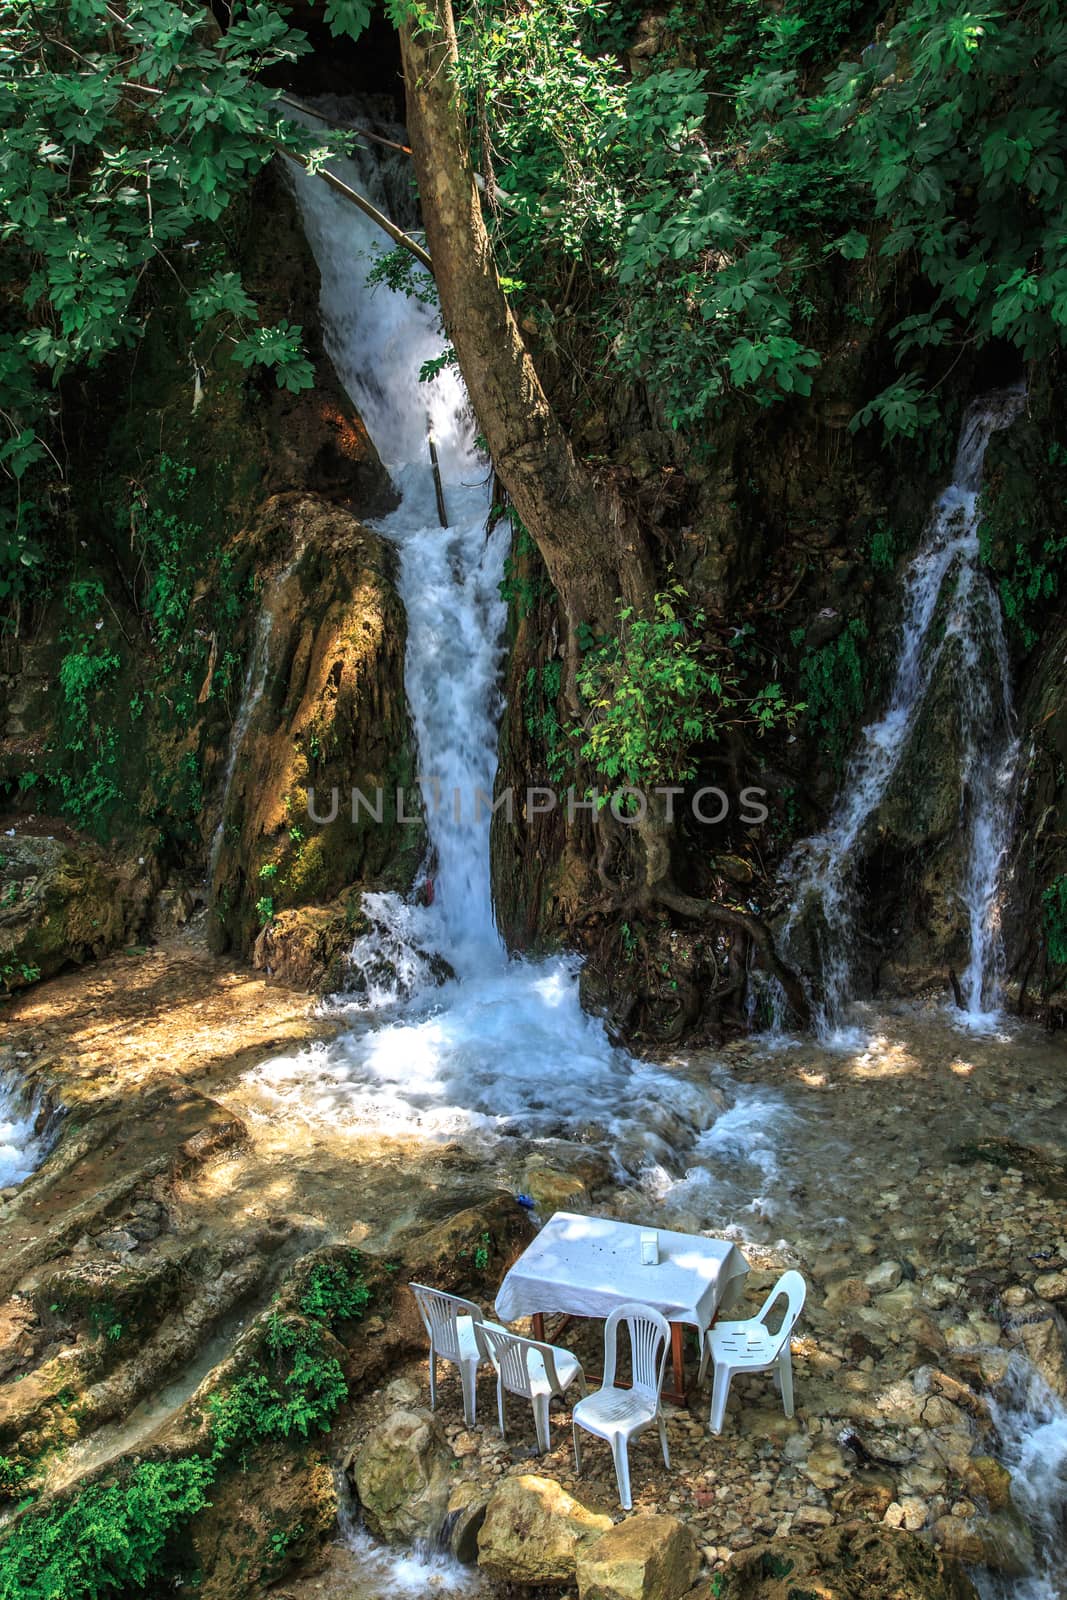 View of the tables and chairs near the flowing water of Harbiye Waterfall on natural rocks among trees.